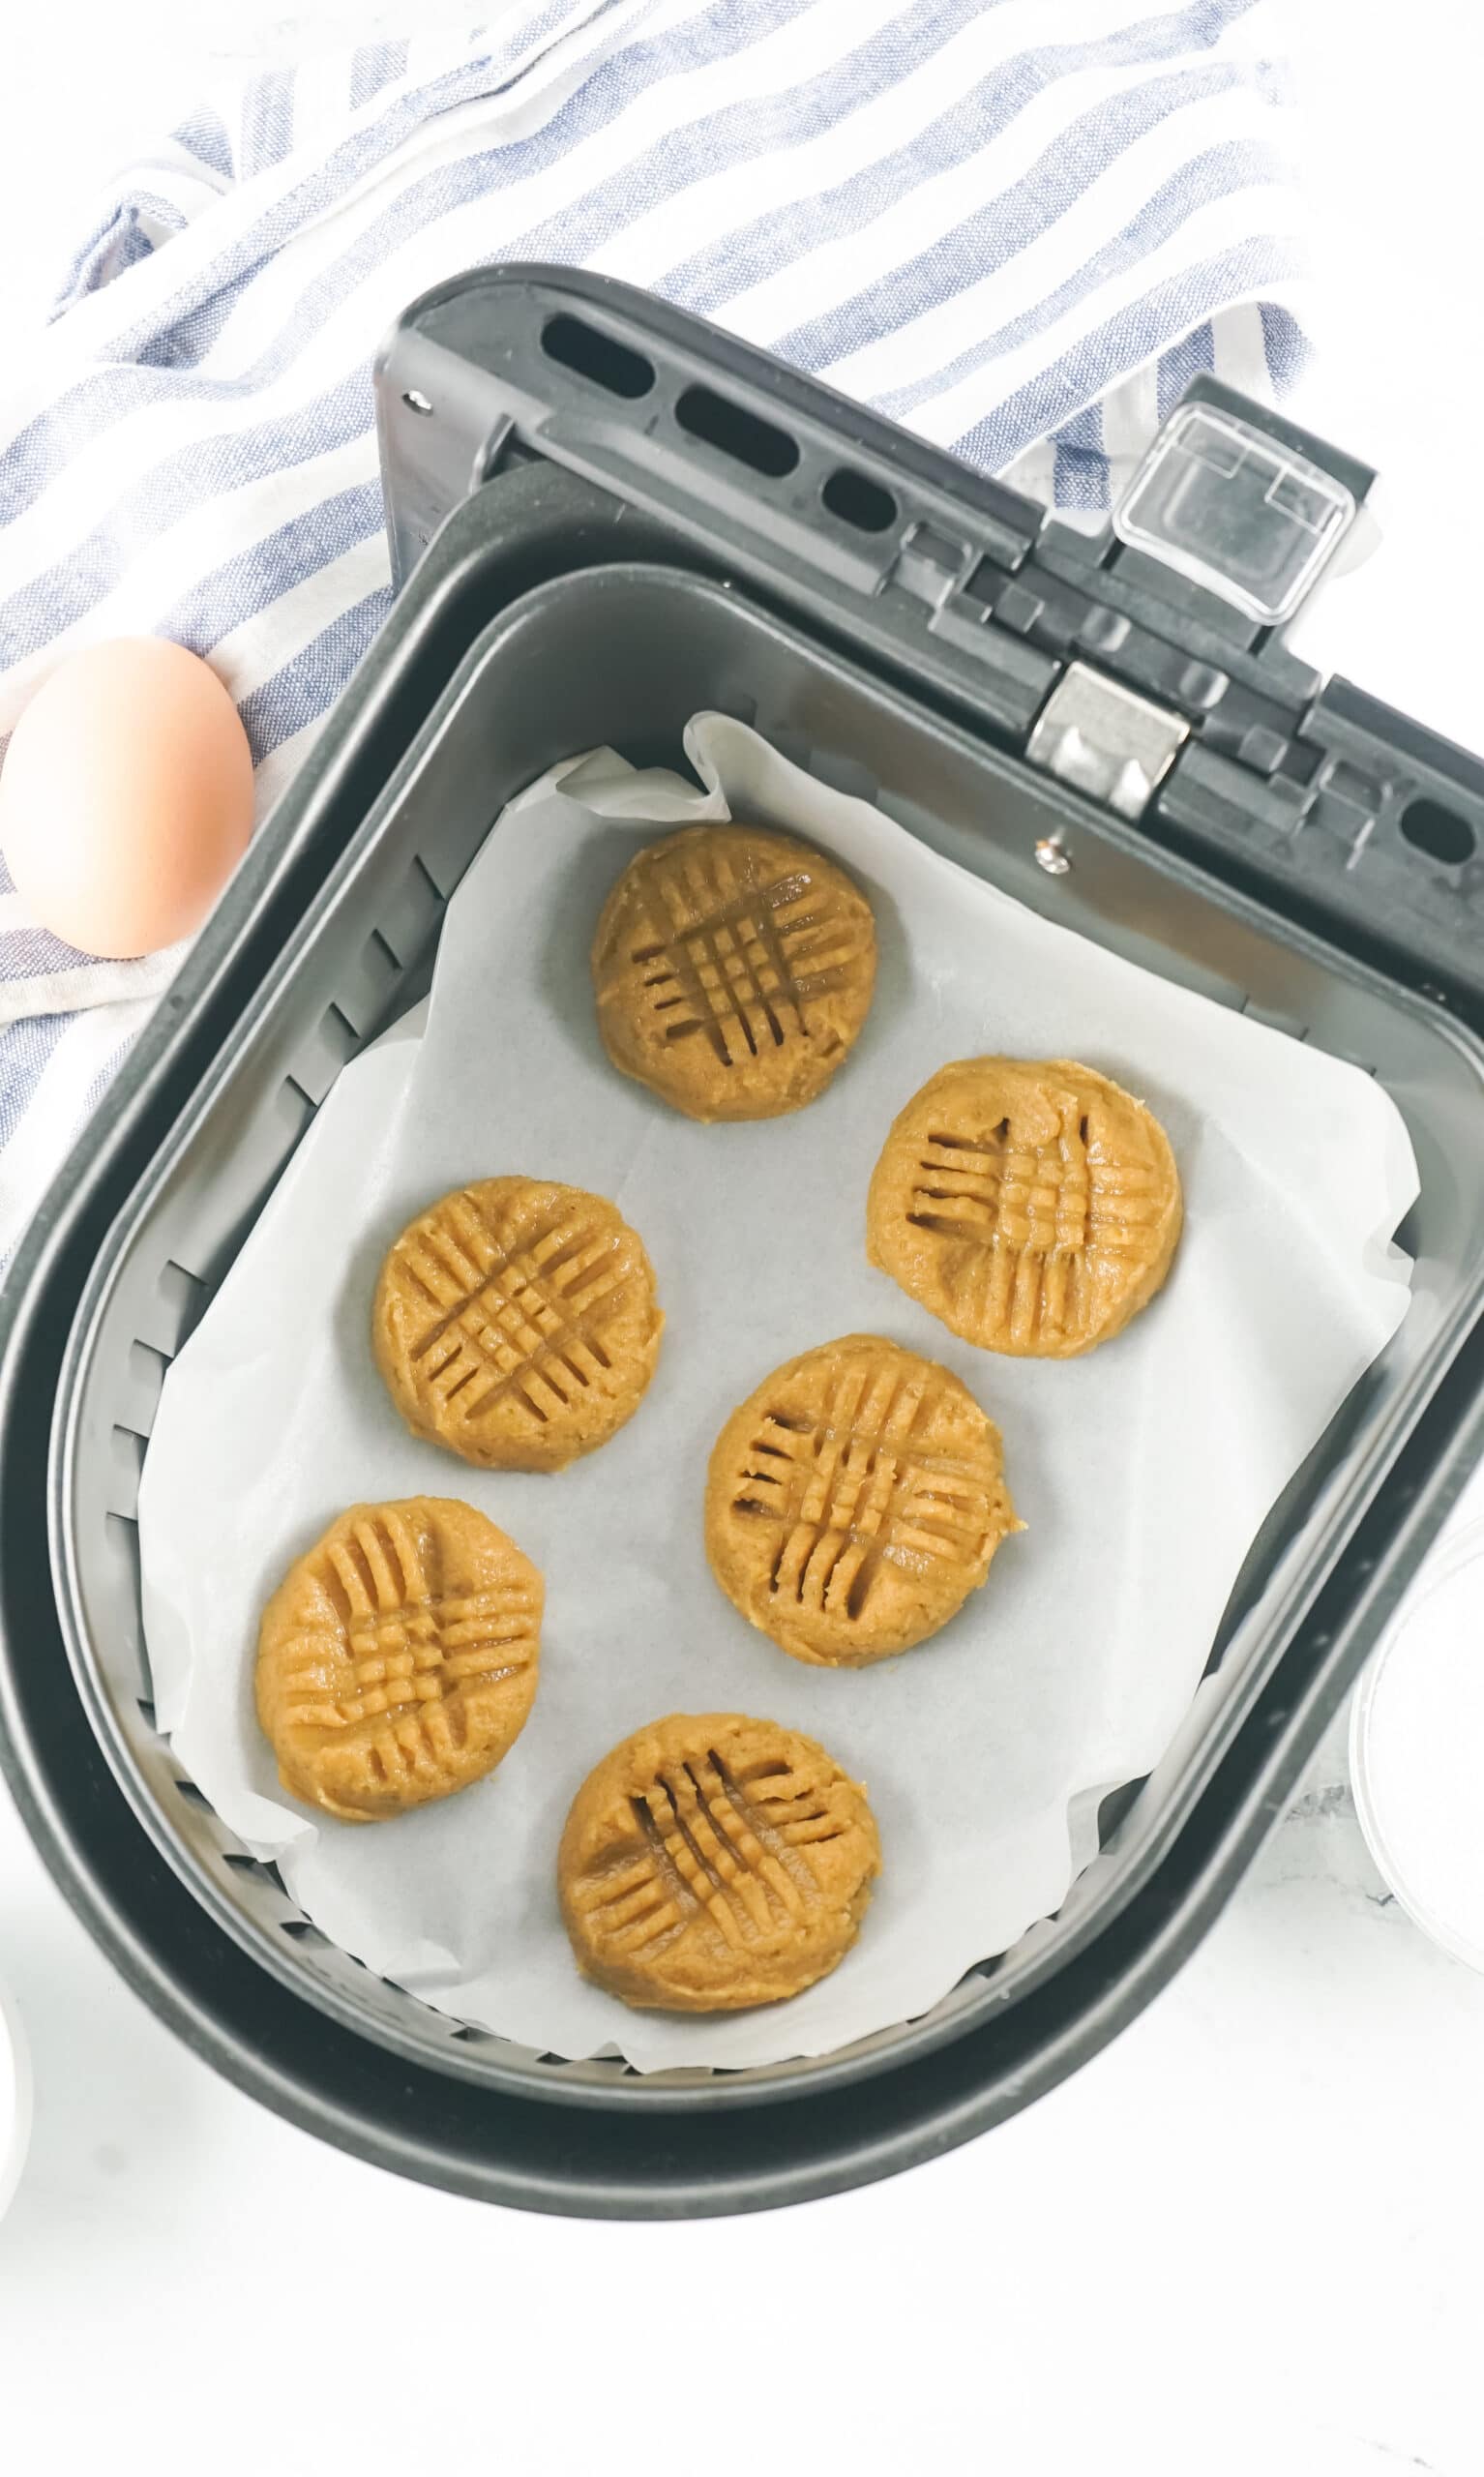 6 peanut butter cookies shaped and placed on parchment paper in an air fryer